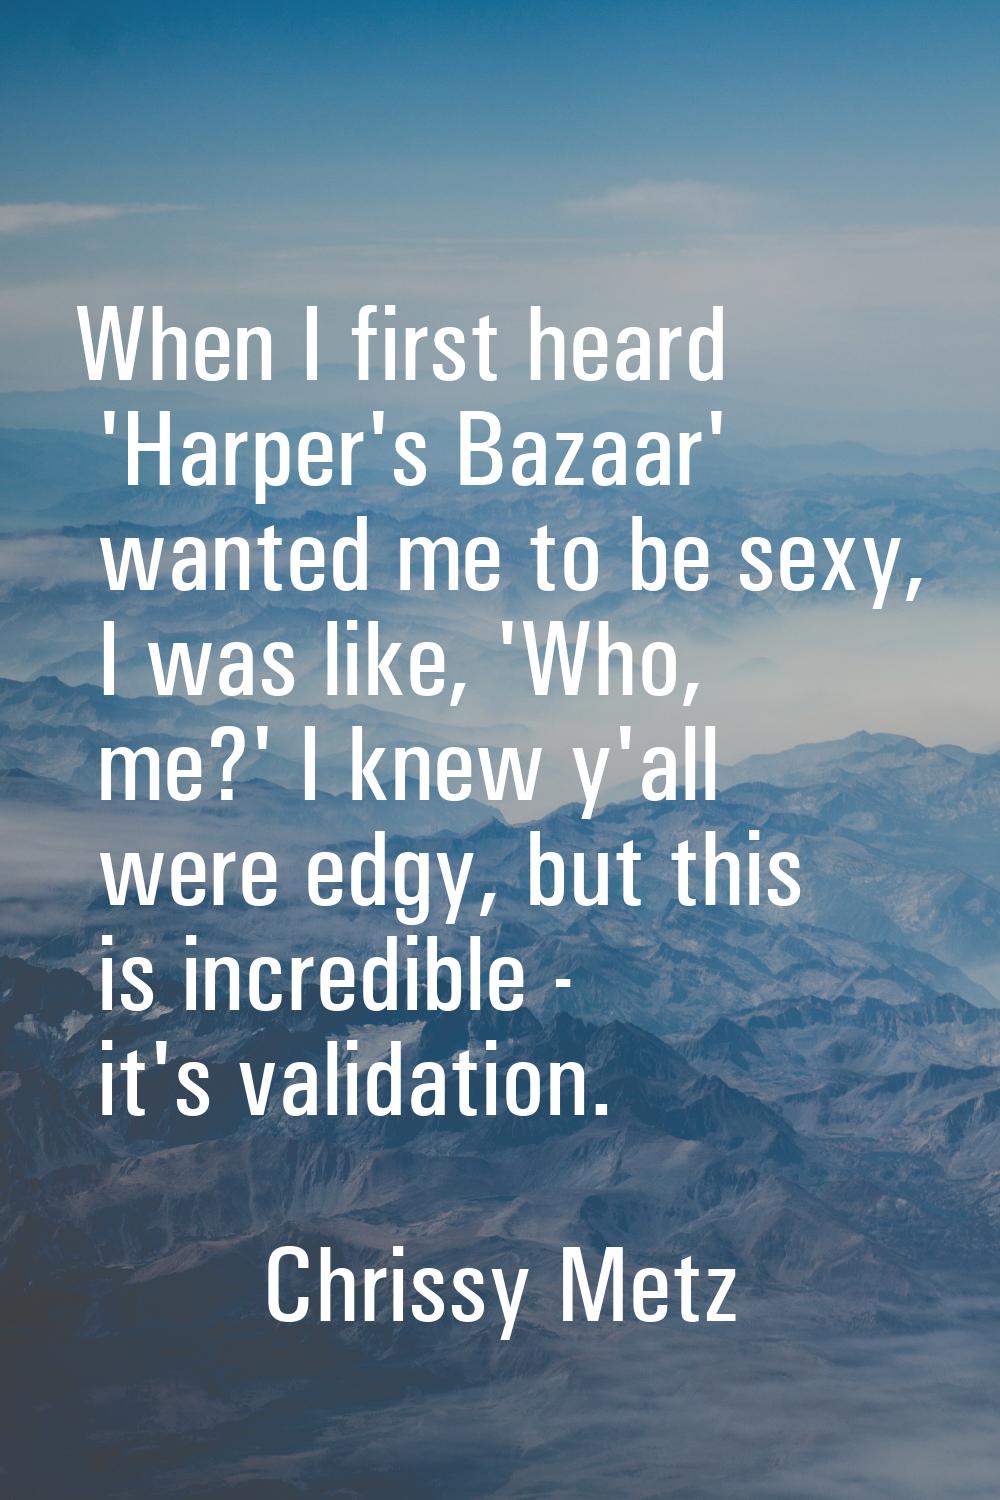 When I first heard 'Harper's Bazaar' wanted me to be sexy, I was like, 'Who, me?' I knew y'all were